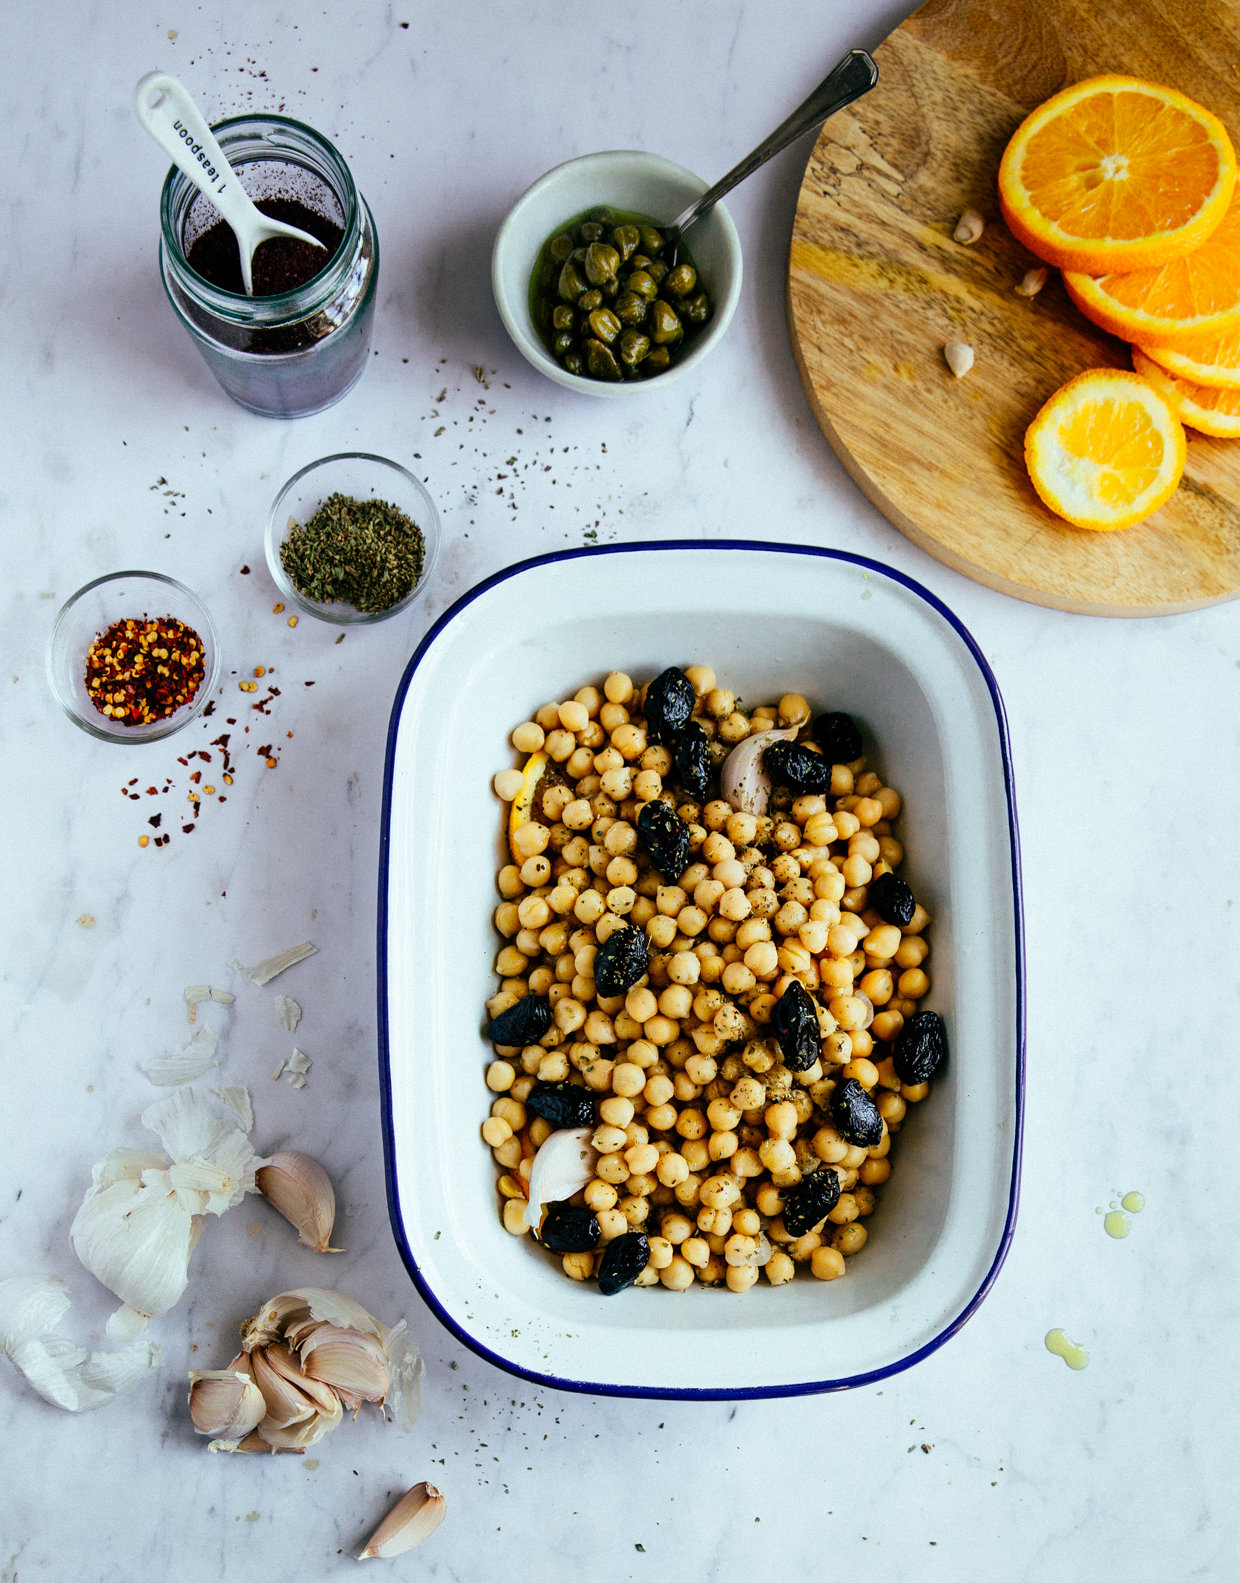 Baked chickpeas with capers, olives & orange